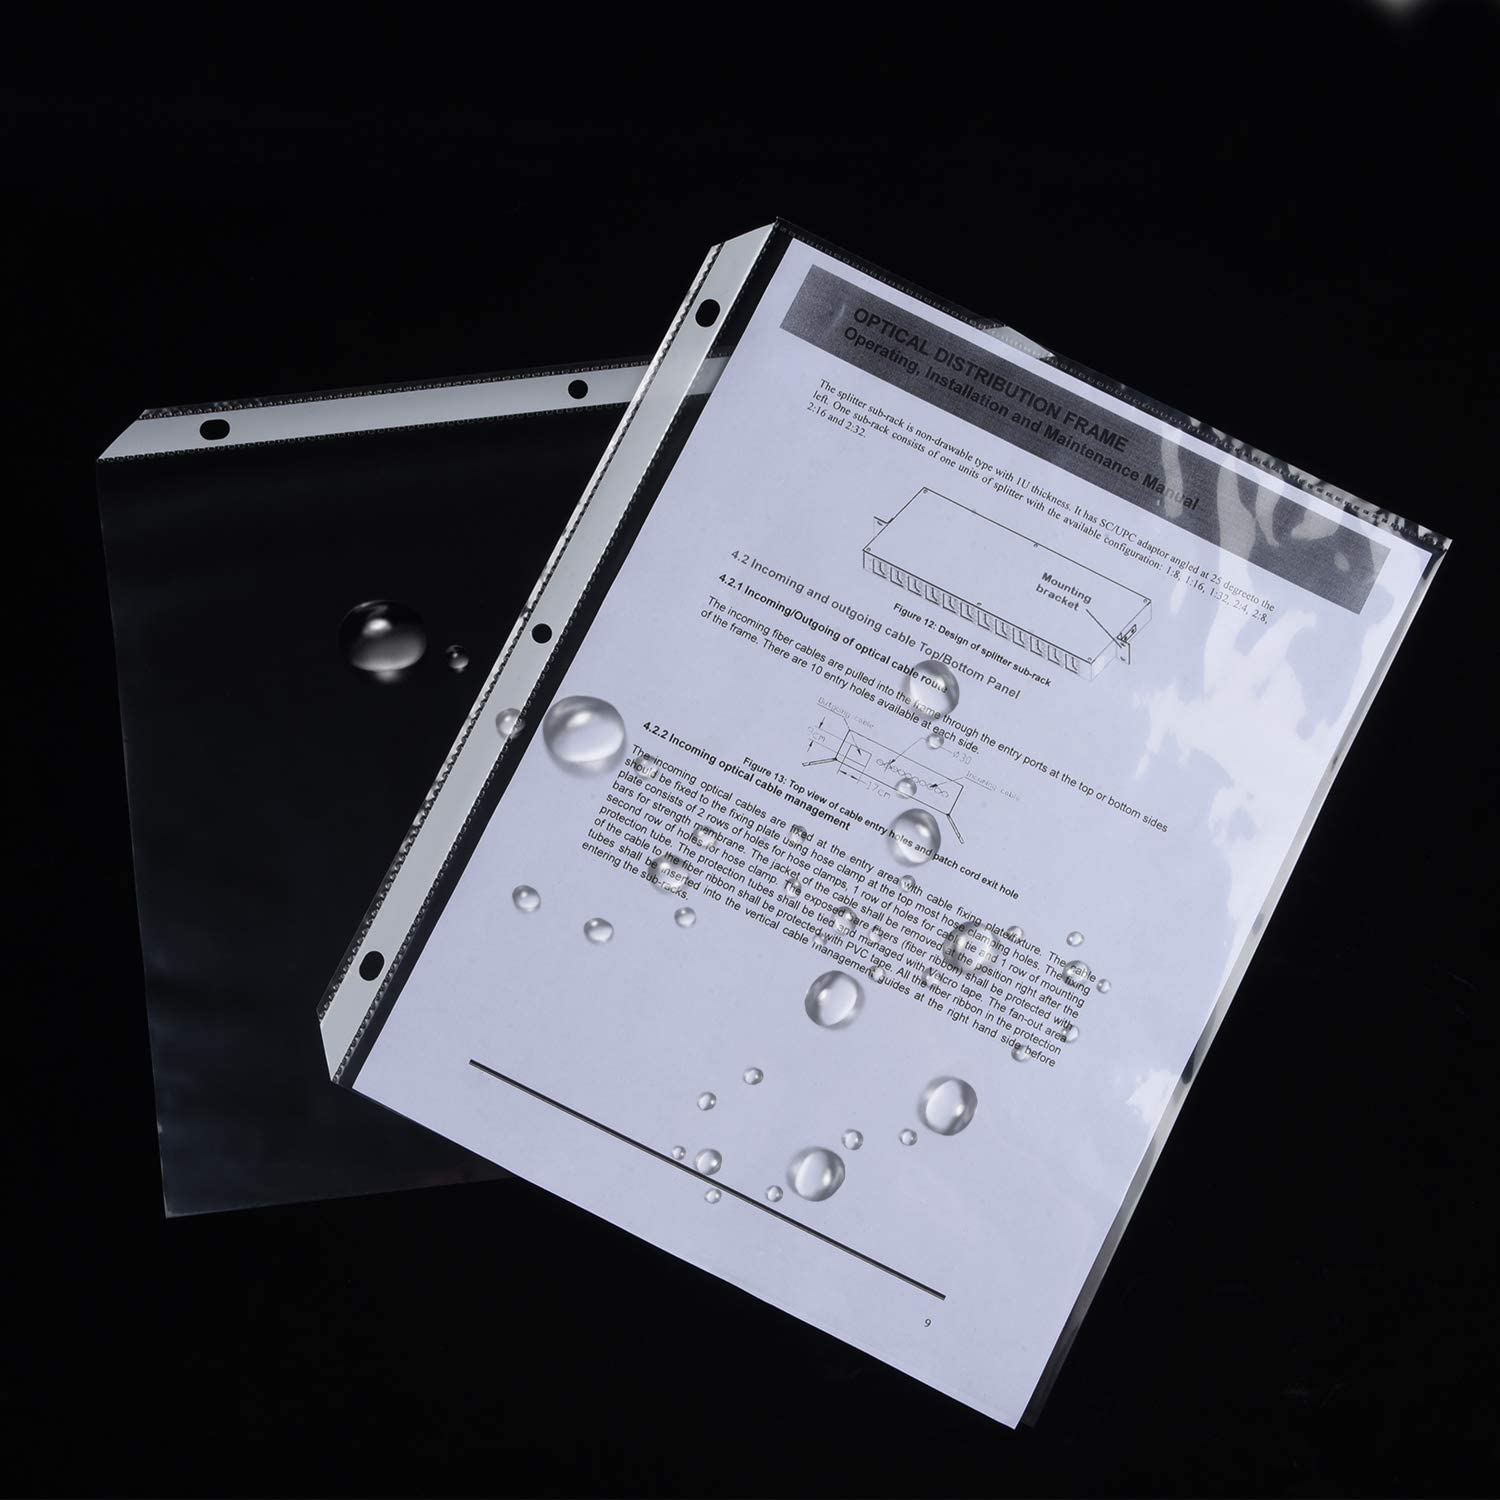 Clear Plastic Sleeves Paper